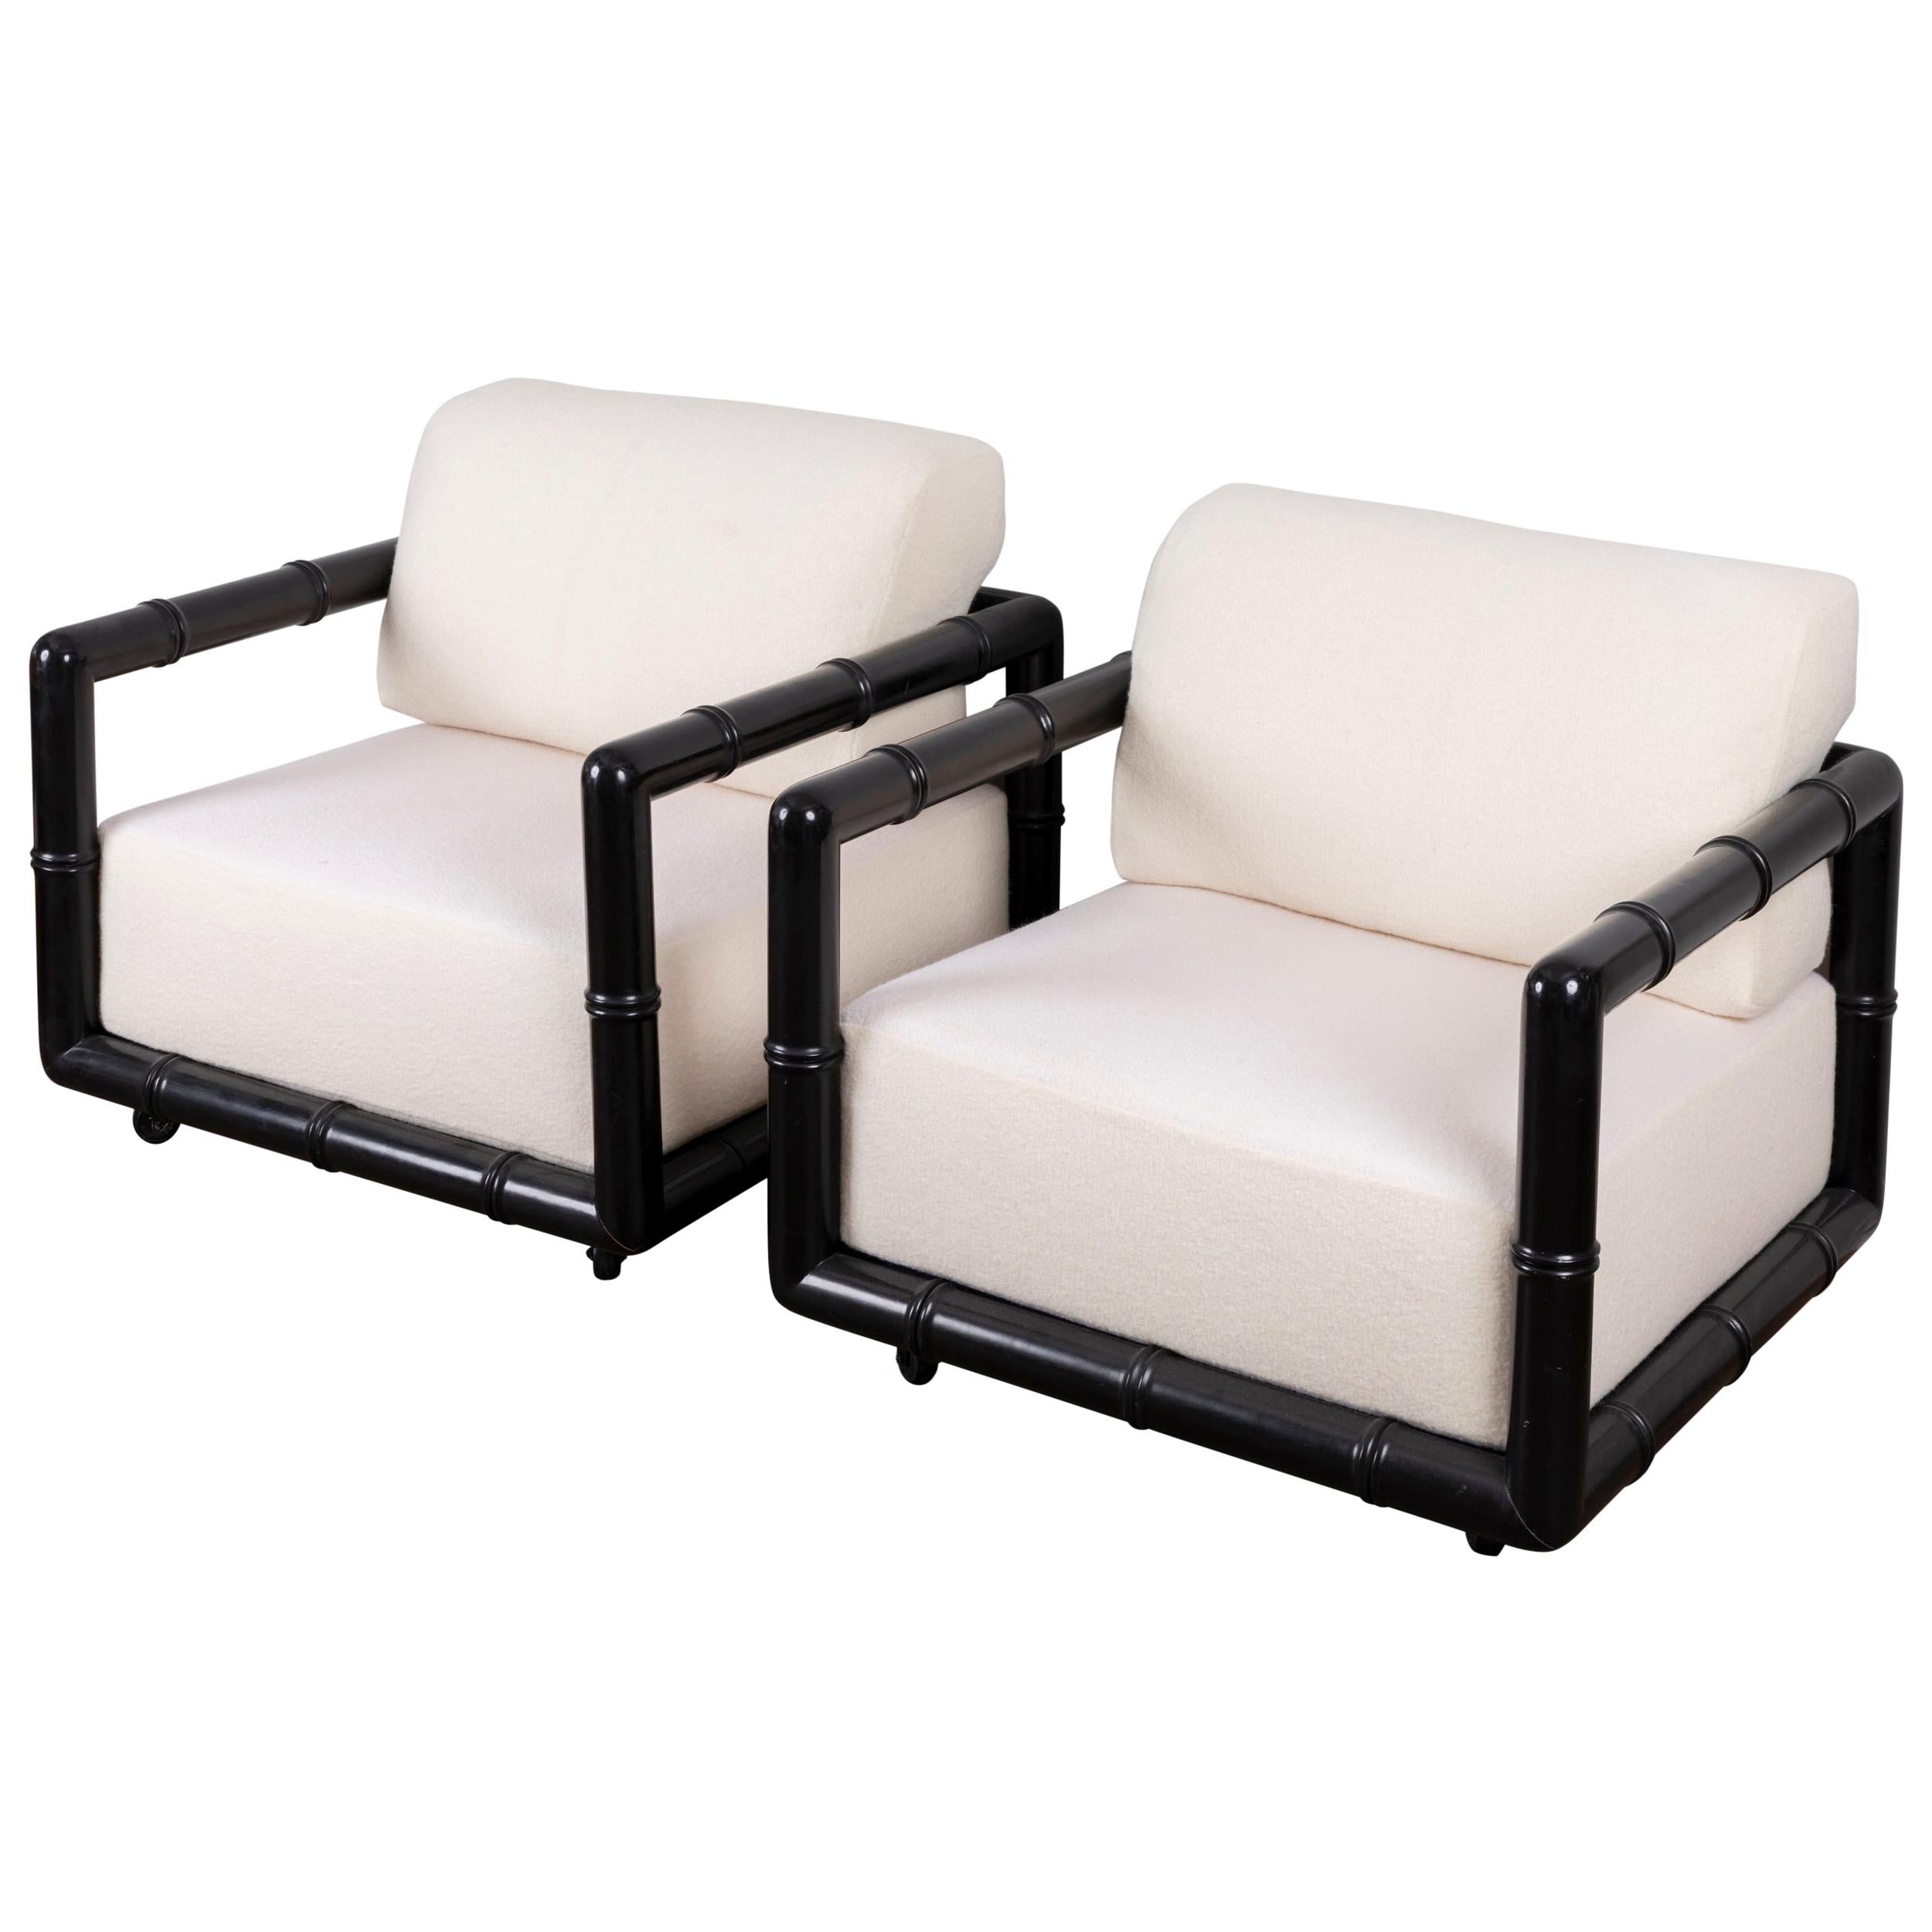 Pair of Black Lacquered "Bamboo" Lounge Chairs